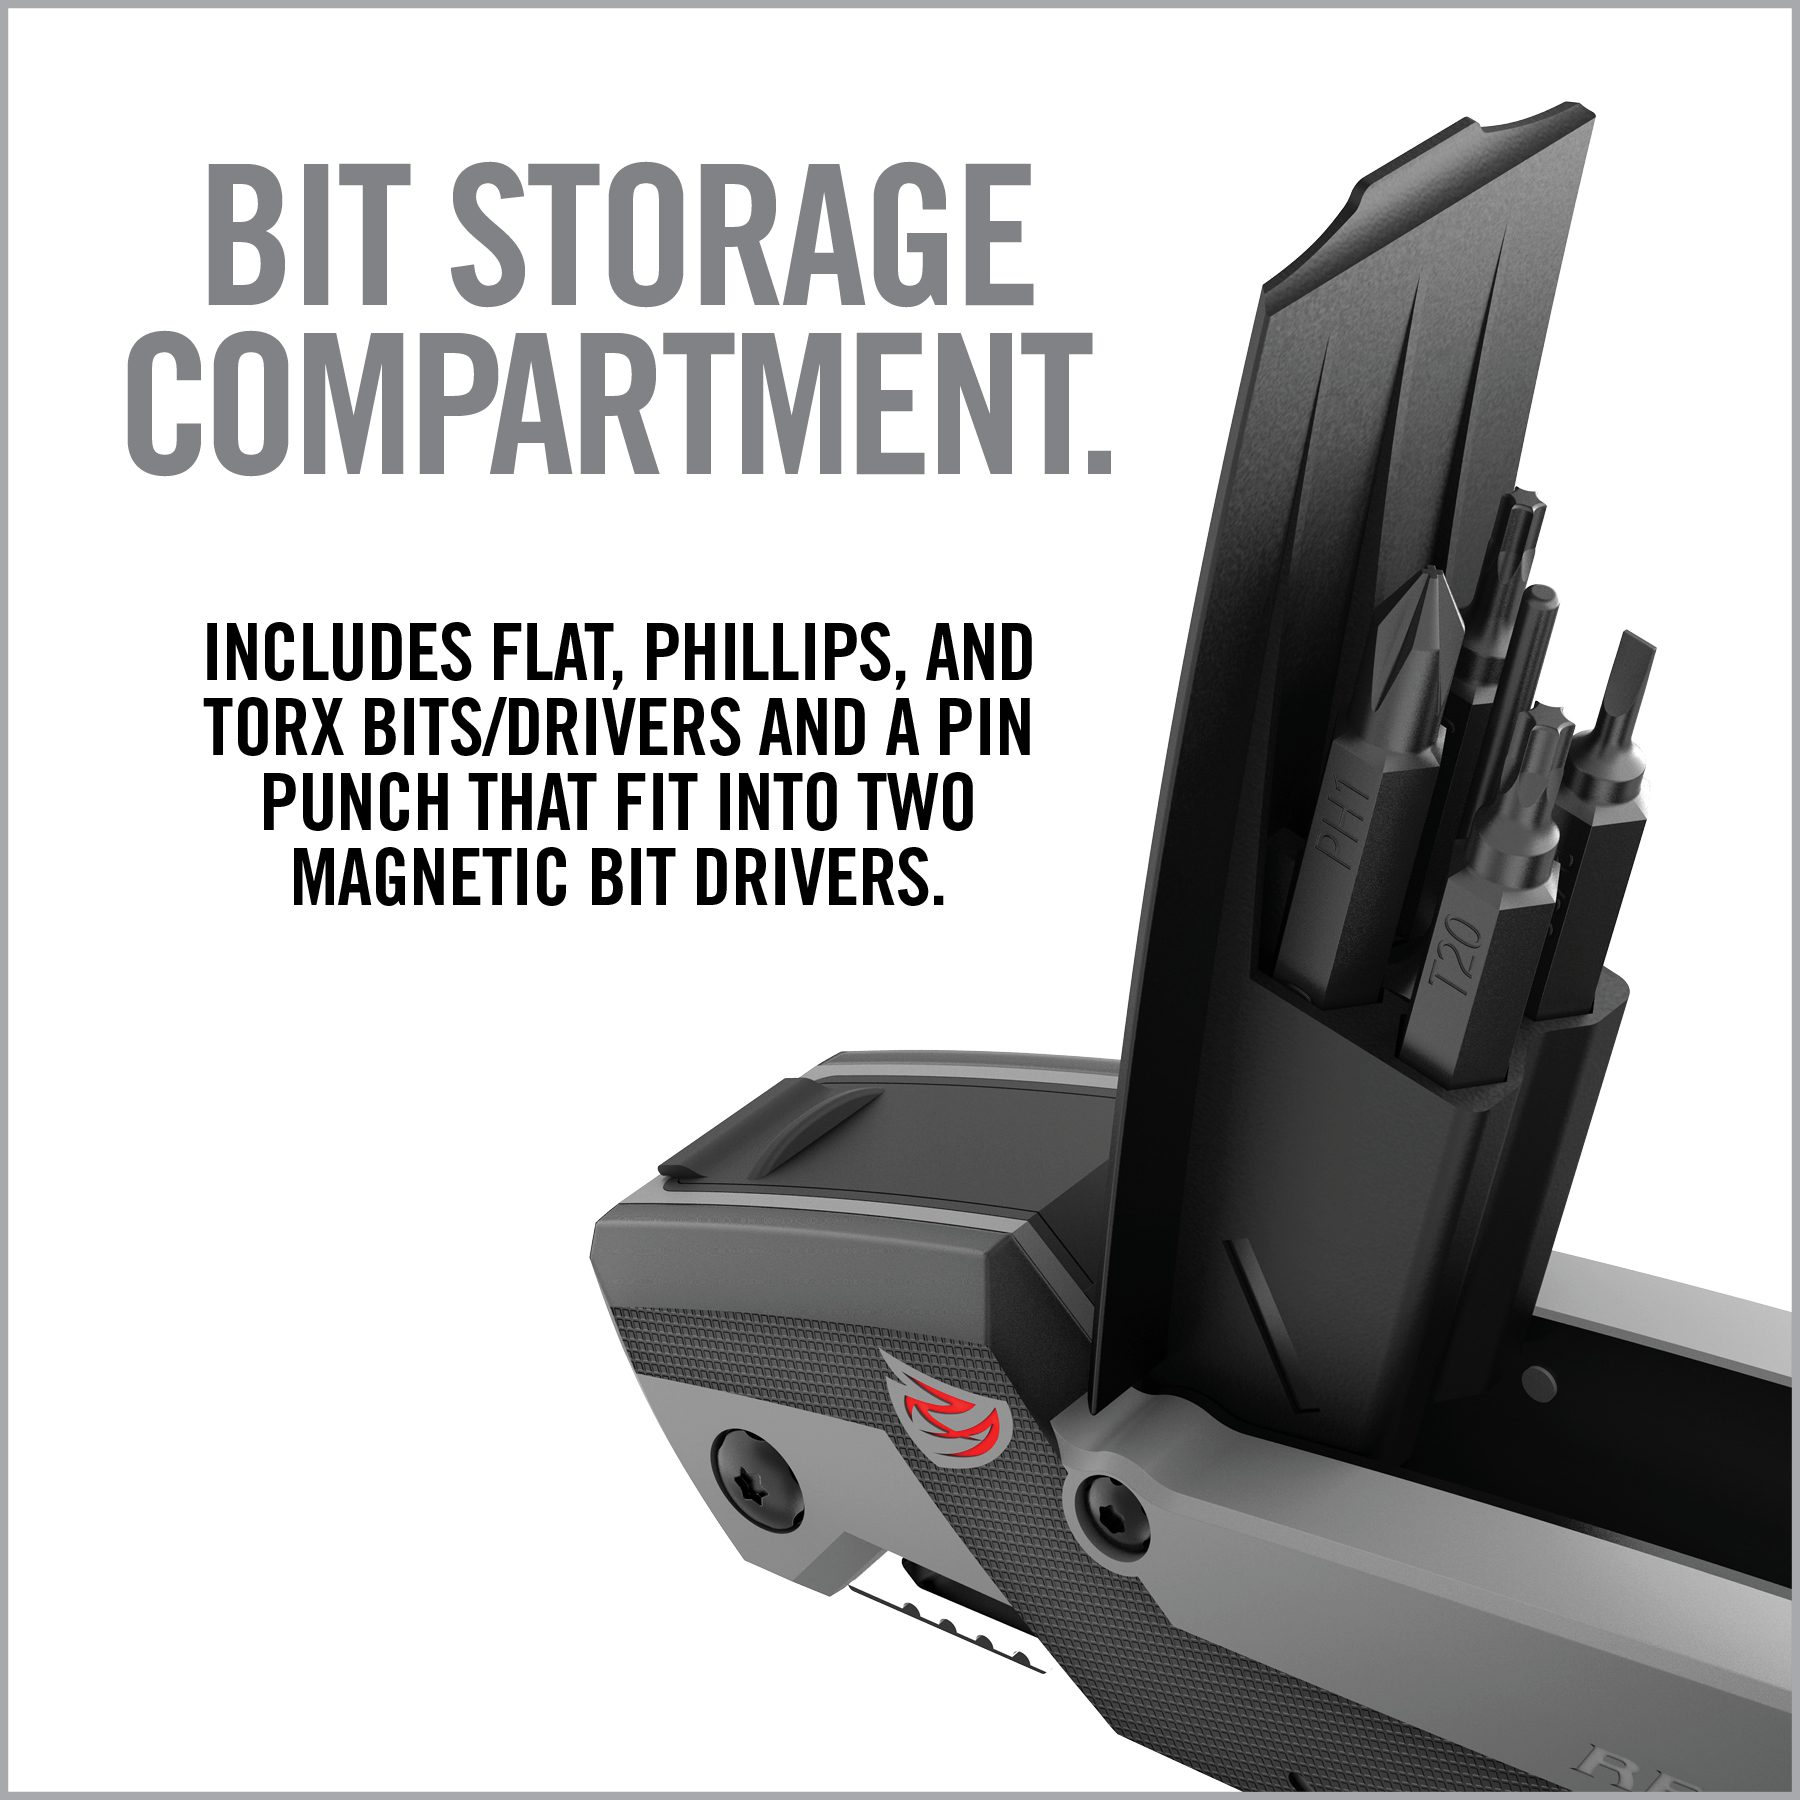 an advertisement for the new bit storage compartment